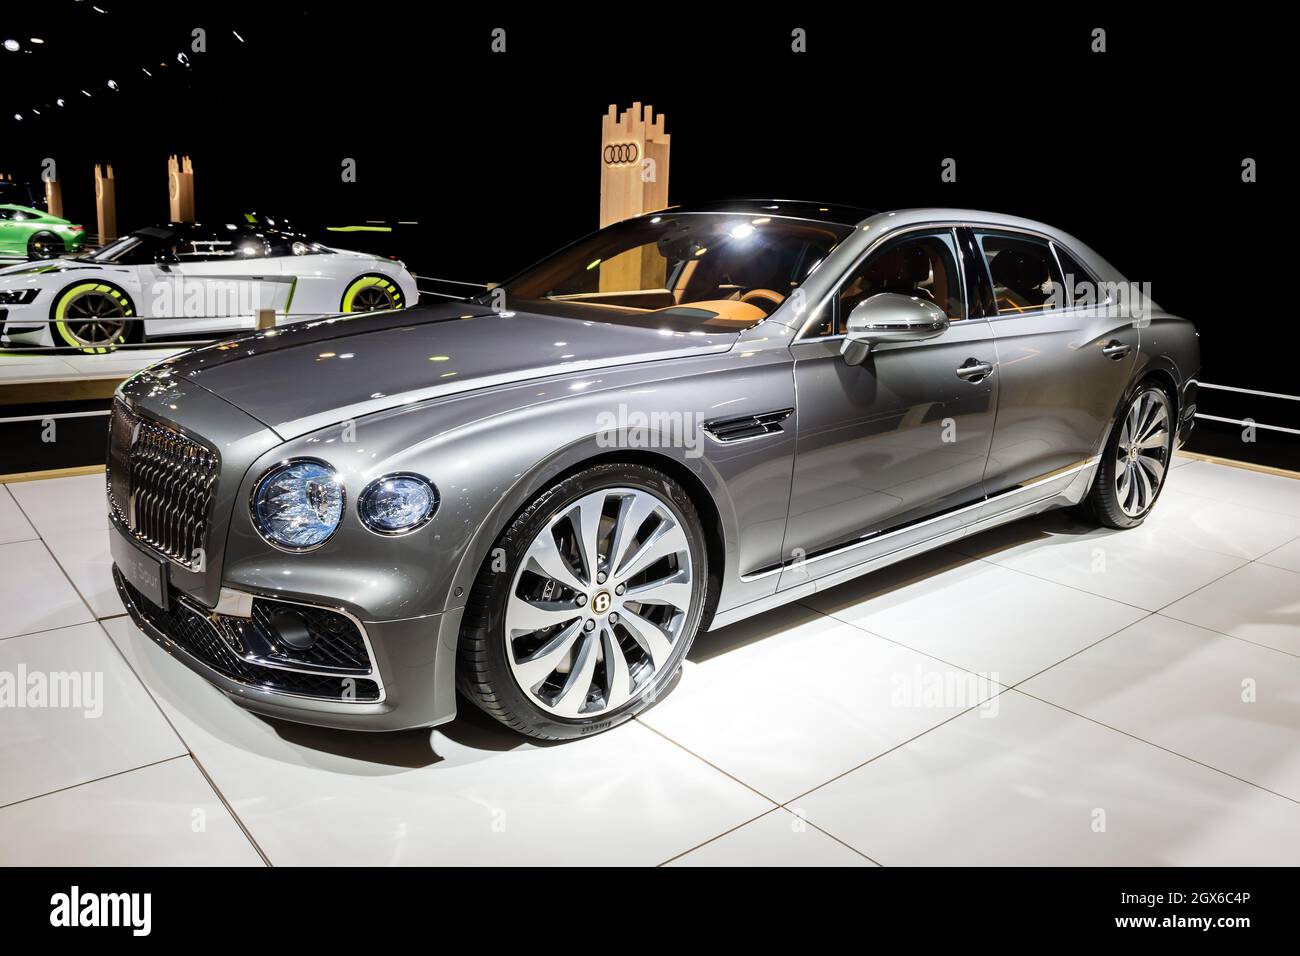 Bentley Flying Spur luxury car showcased at the Autosalon 2020 Motor Show. Brussels, Belgium - January 9, 2020. Stock Photo